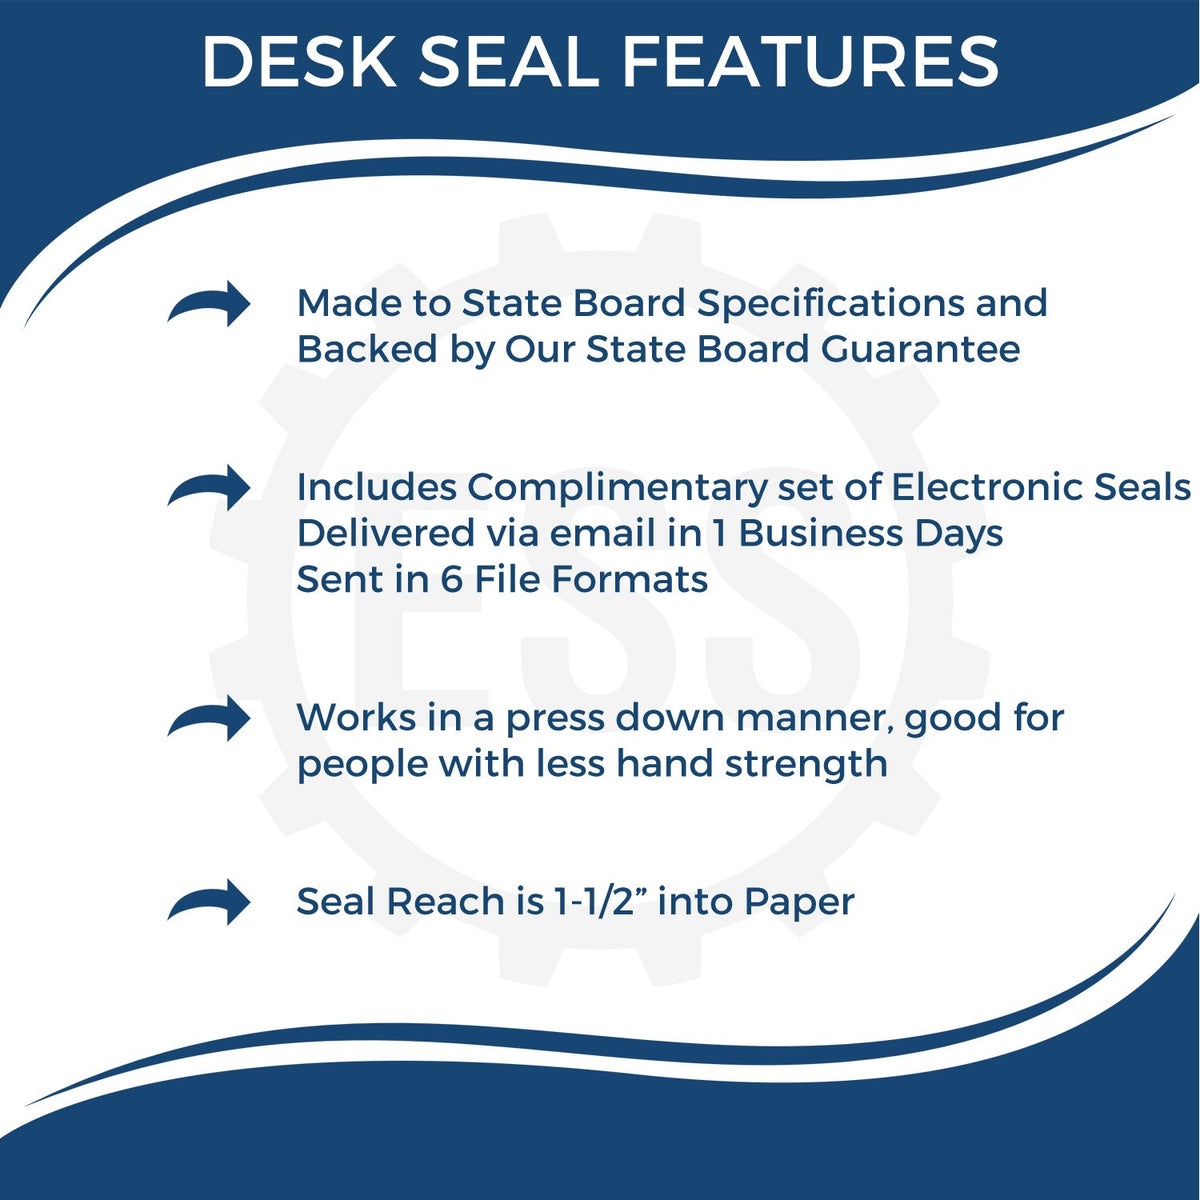 A picture of an infographic highlighting the selling points for the South Carolina Engineer Desk Seal